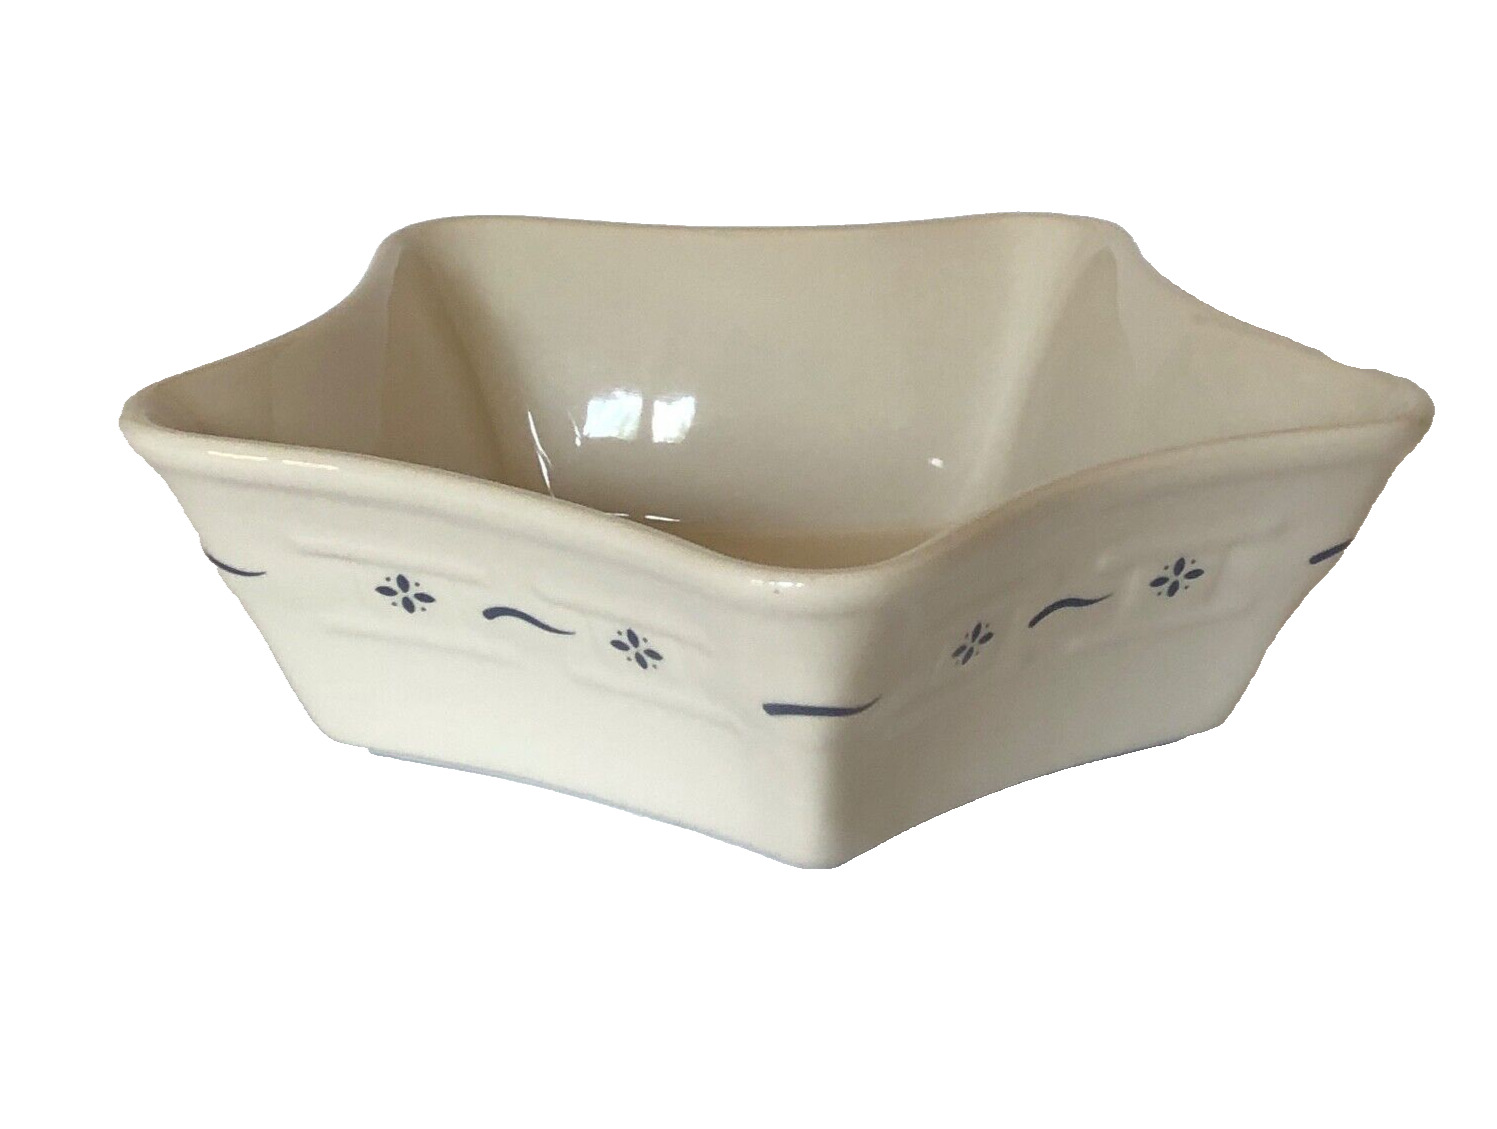 Longaberger Pottery Woven Traditions Classic Blue Star Bowl 9